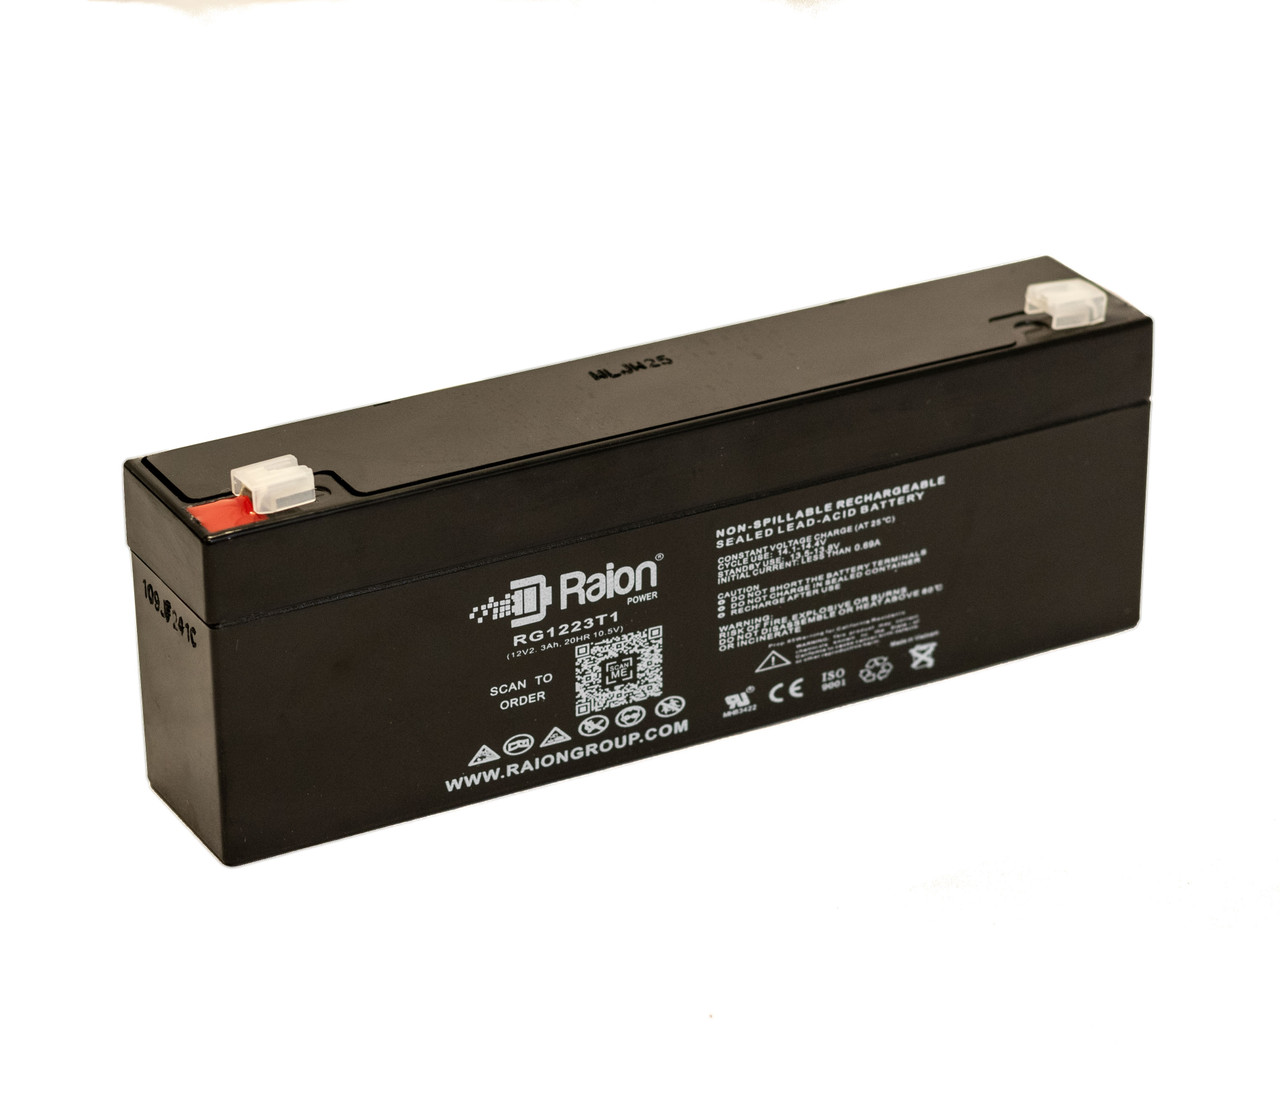 Raion Power RG1223T1 Replacement Battery for Avi 400